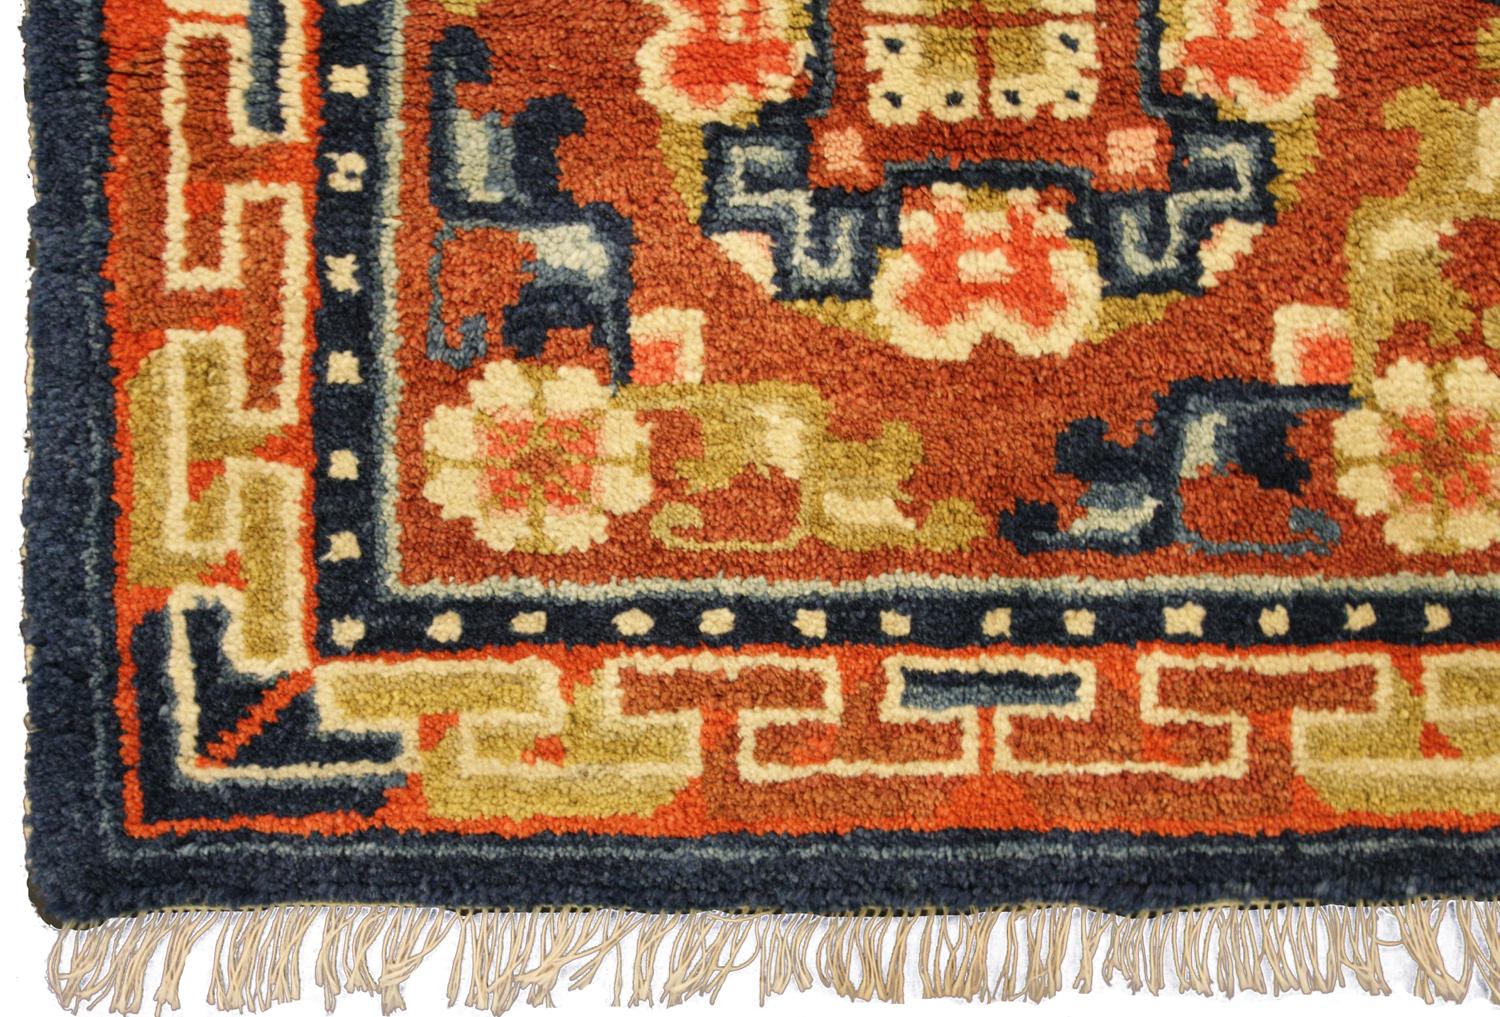 This is a semi-antique Tibetan rug woven during the second quarter of the 20th century circa 1940 and measures 108 x 56 CM in size. This piece is two mat rugs that are originally woven on the same loom and have the exact same design. The field is